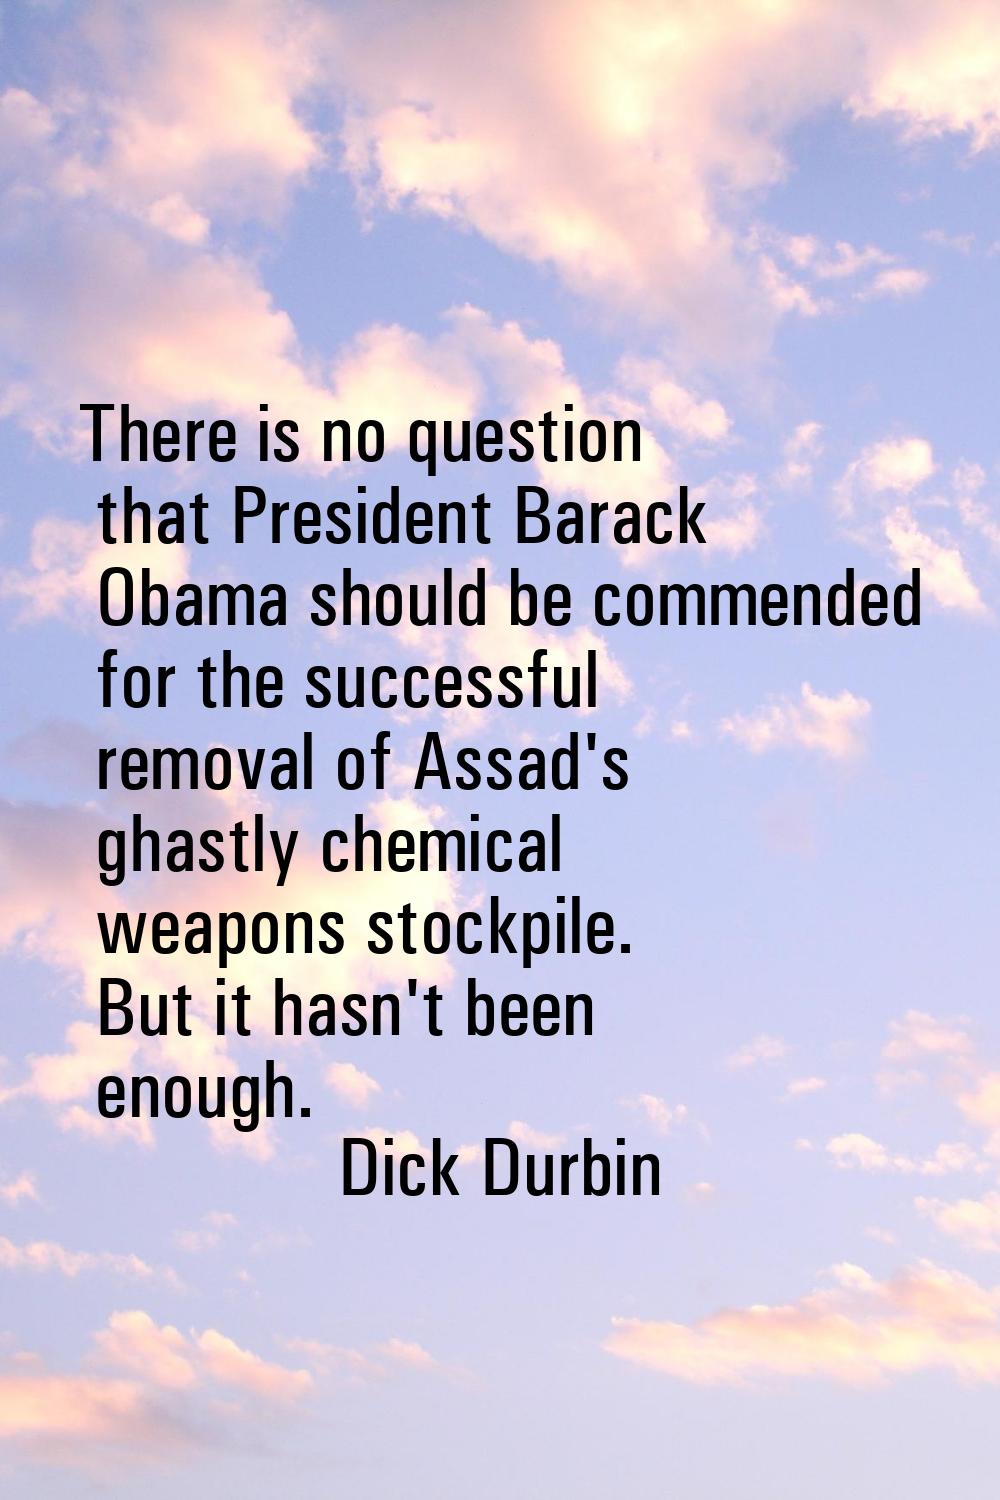 There is no question that President Barack Obama should be commended for the successful removal of 